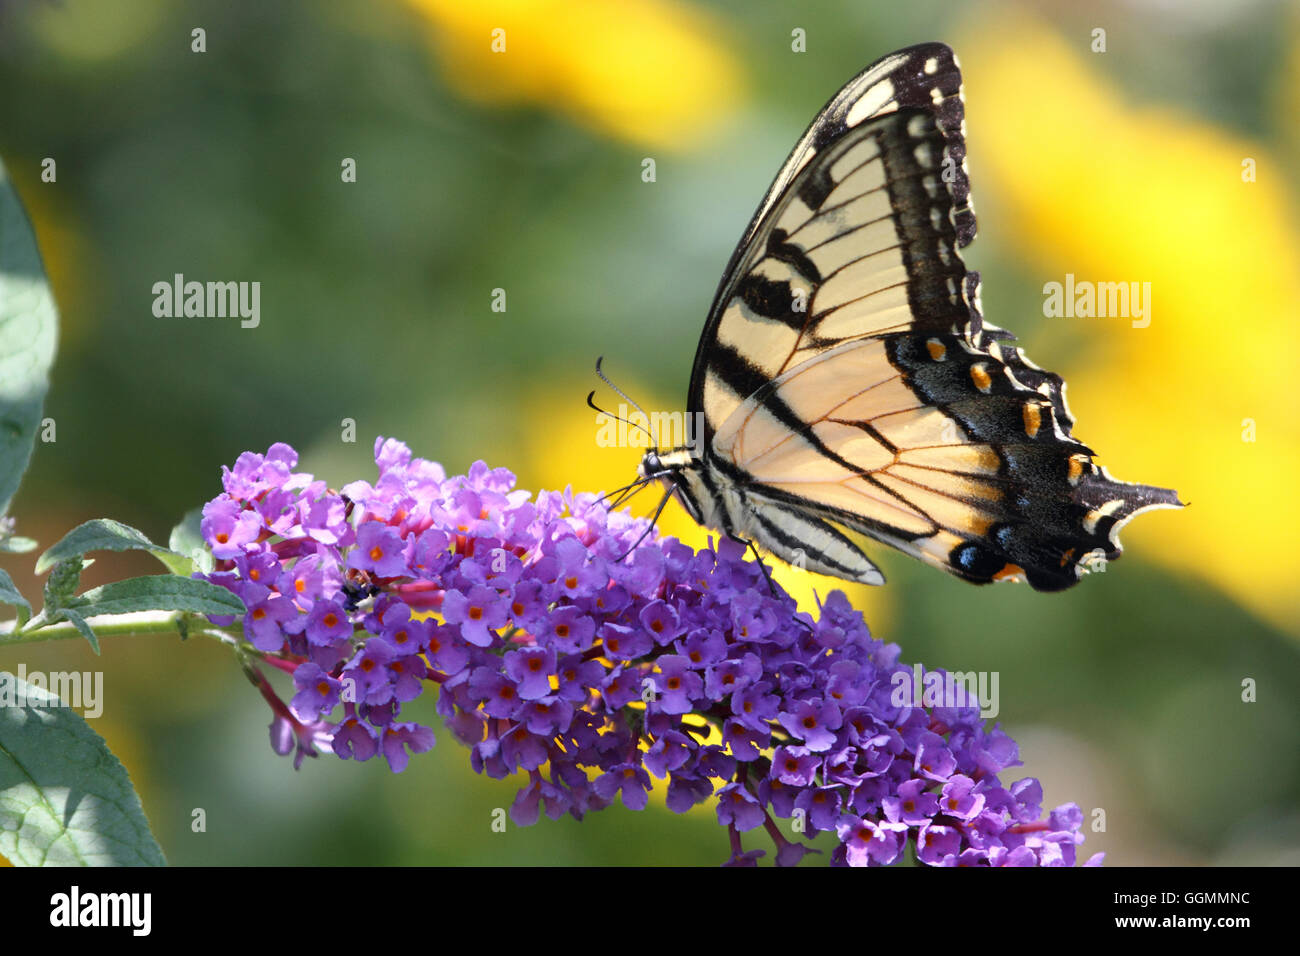 An Eastern Tiger Swallowtail butterfly, Papilio glaucus, feeding at a butterfly bush, Verona Park, NJ, USA Stock Photo